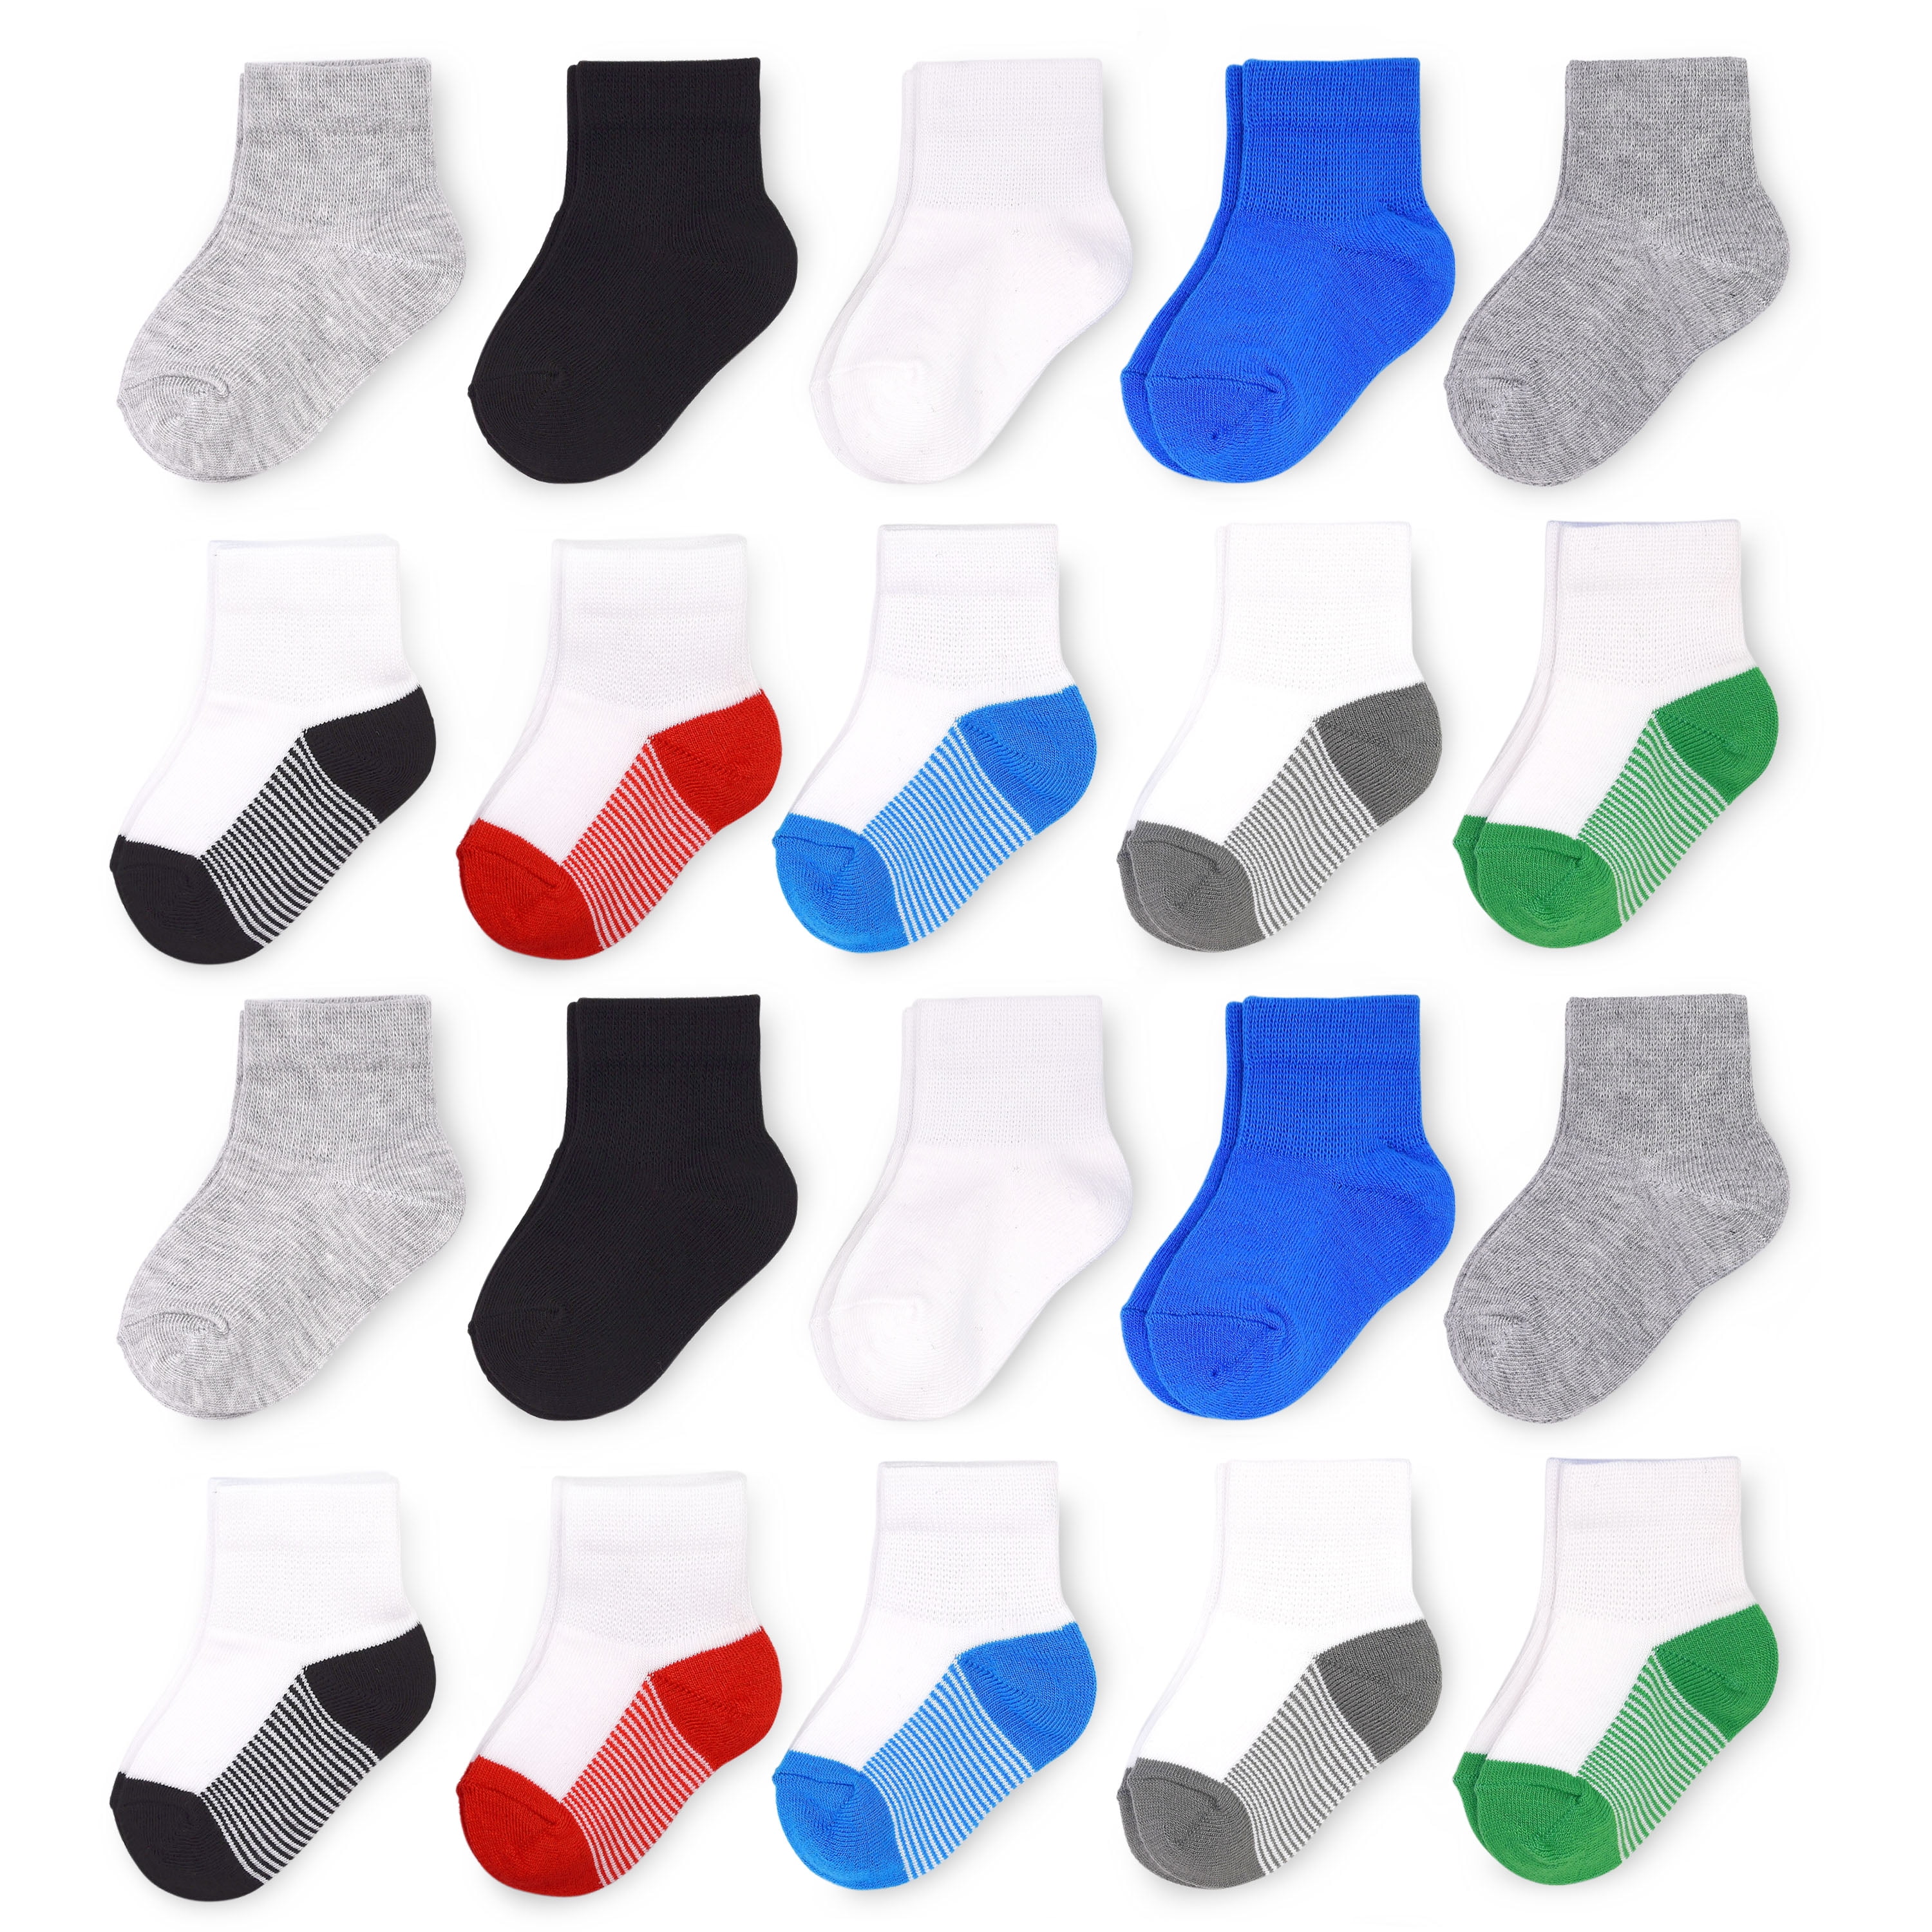 Fruit of the Loom Baby and Toddler Boy Ankle Socks, 20-Pack, Size 6M-5T ...